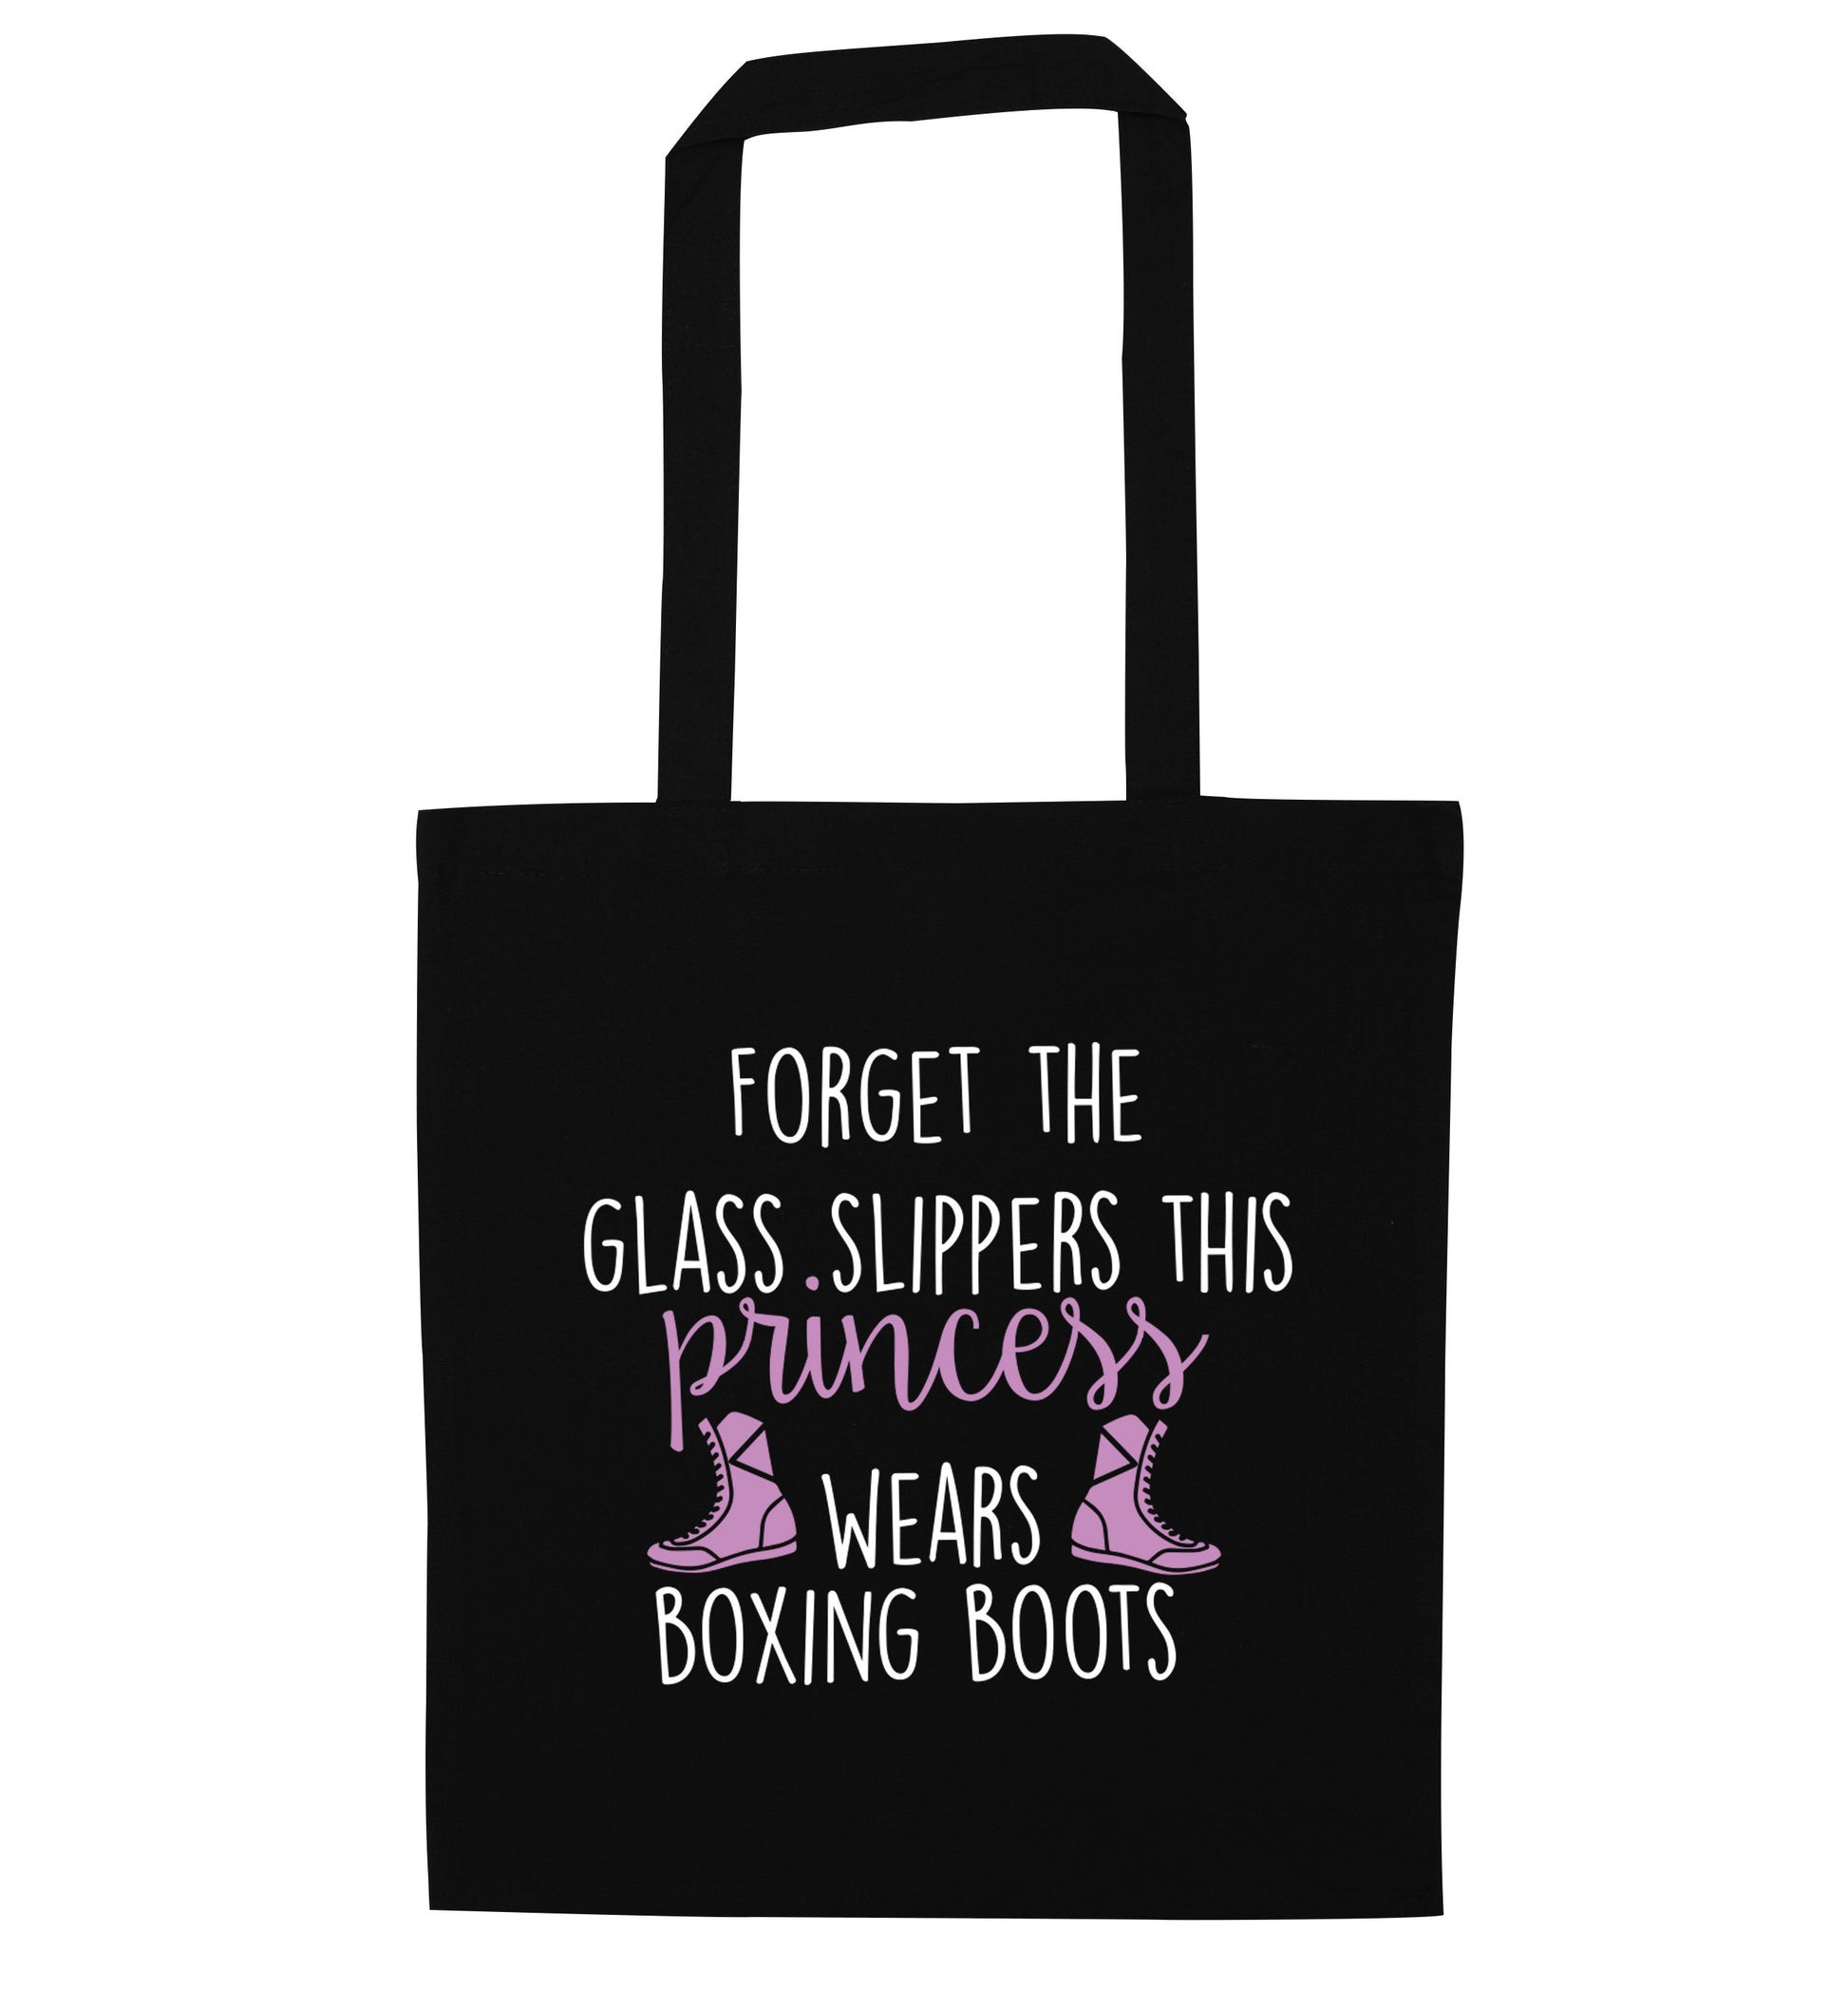 Forget the glass slippers this princess wears boxing boots black tote bag